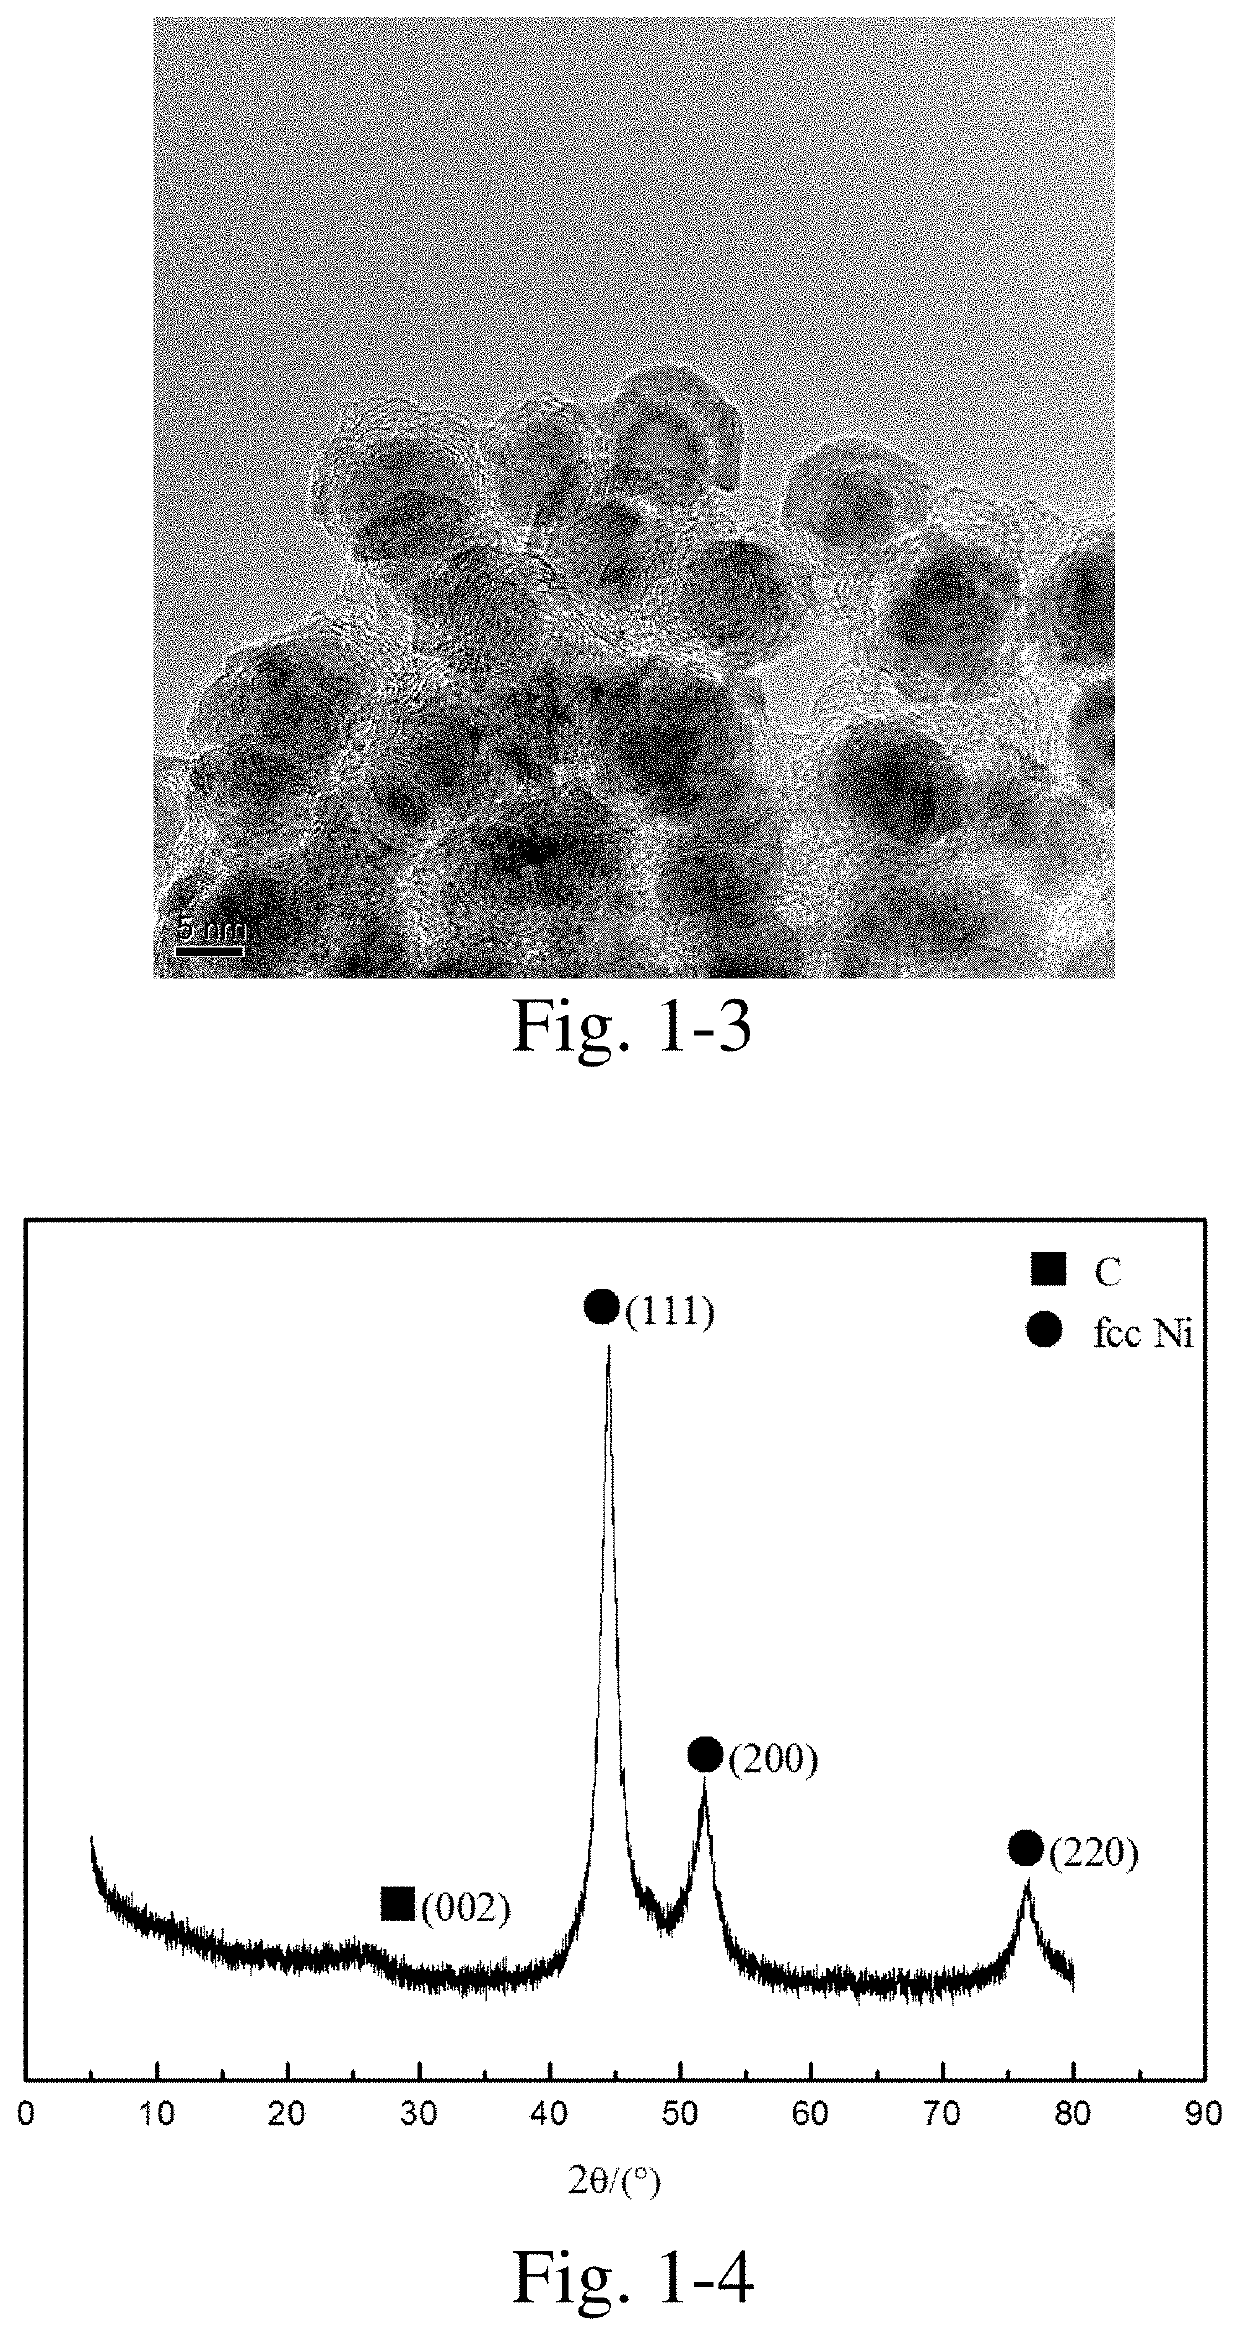 Carbon-Coated Transition Metal Nanocomposite Material, its Preparation and Application Thereof